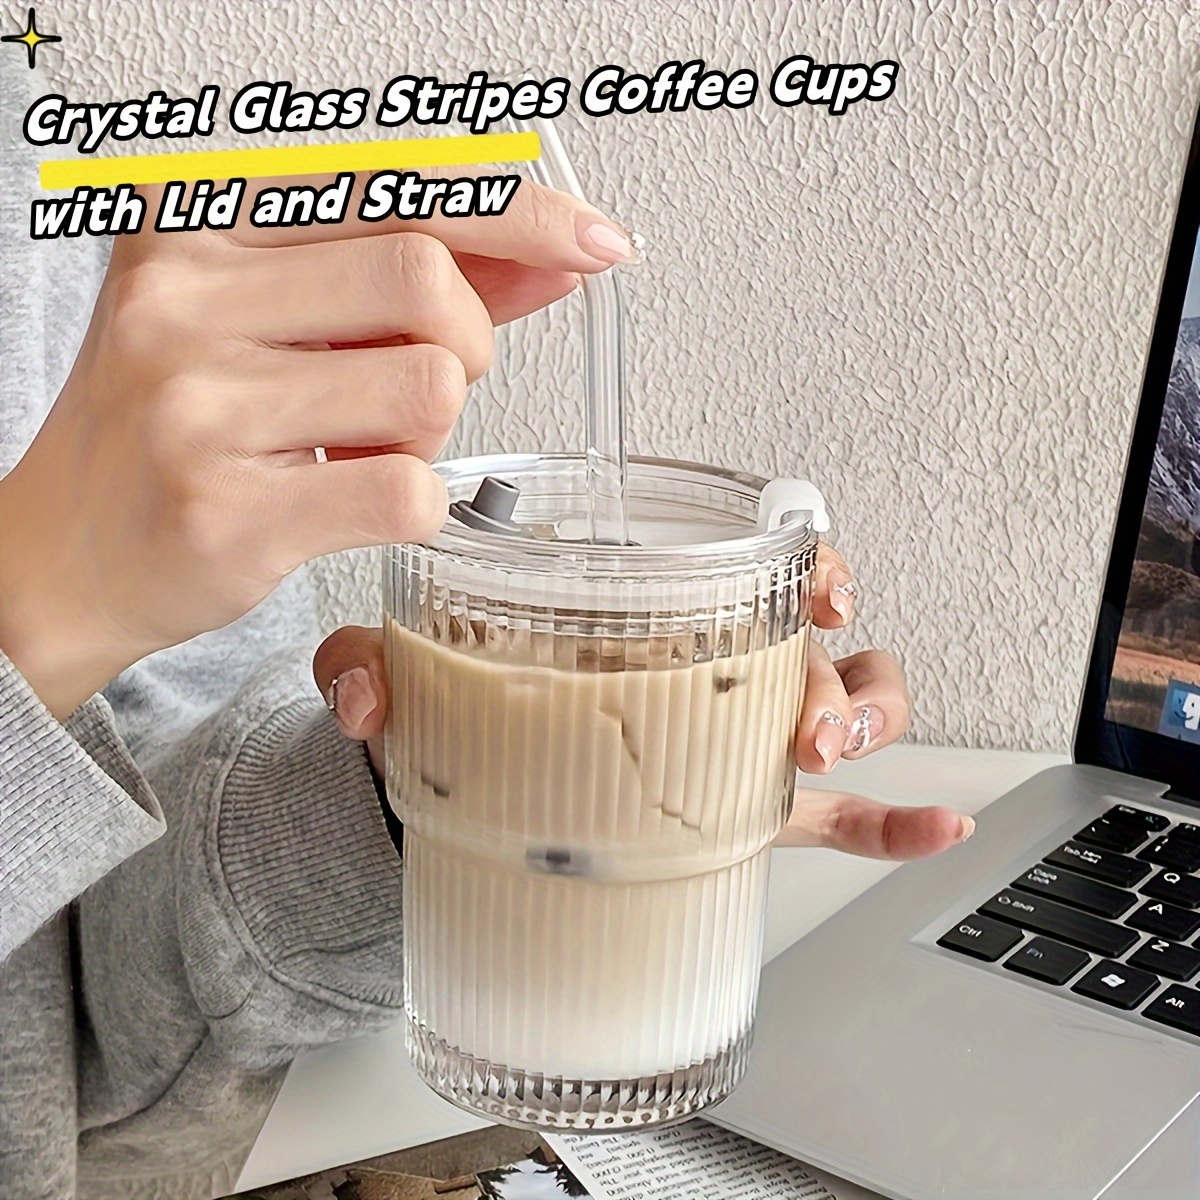 

Sipping" Crystal Clear Glass Coffee Mug With Lid & Straw - Perfect For Iced Latte, Juice, Tea | Thick-walled Mason Jar Design | Ideal For On-the-go & Parties | Striped Table Decor